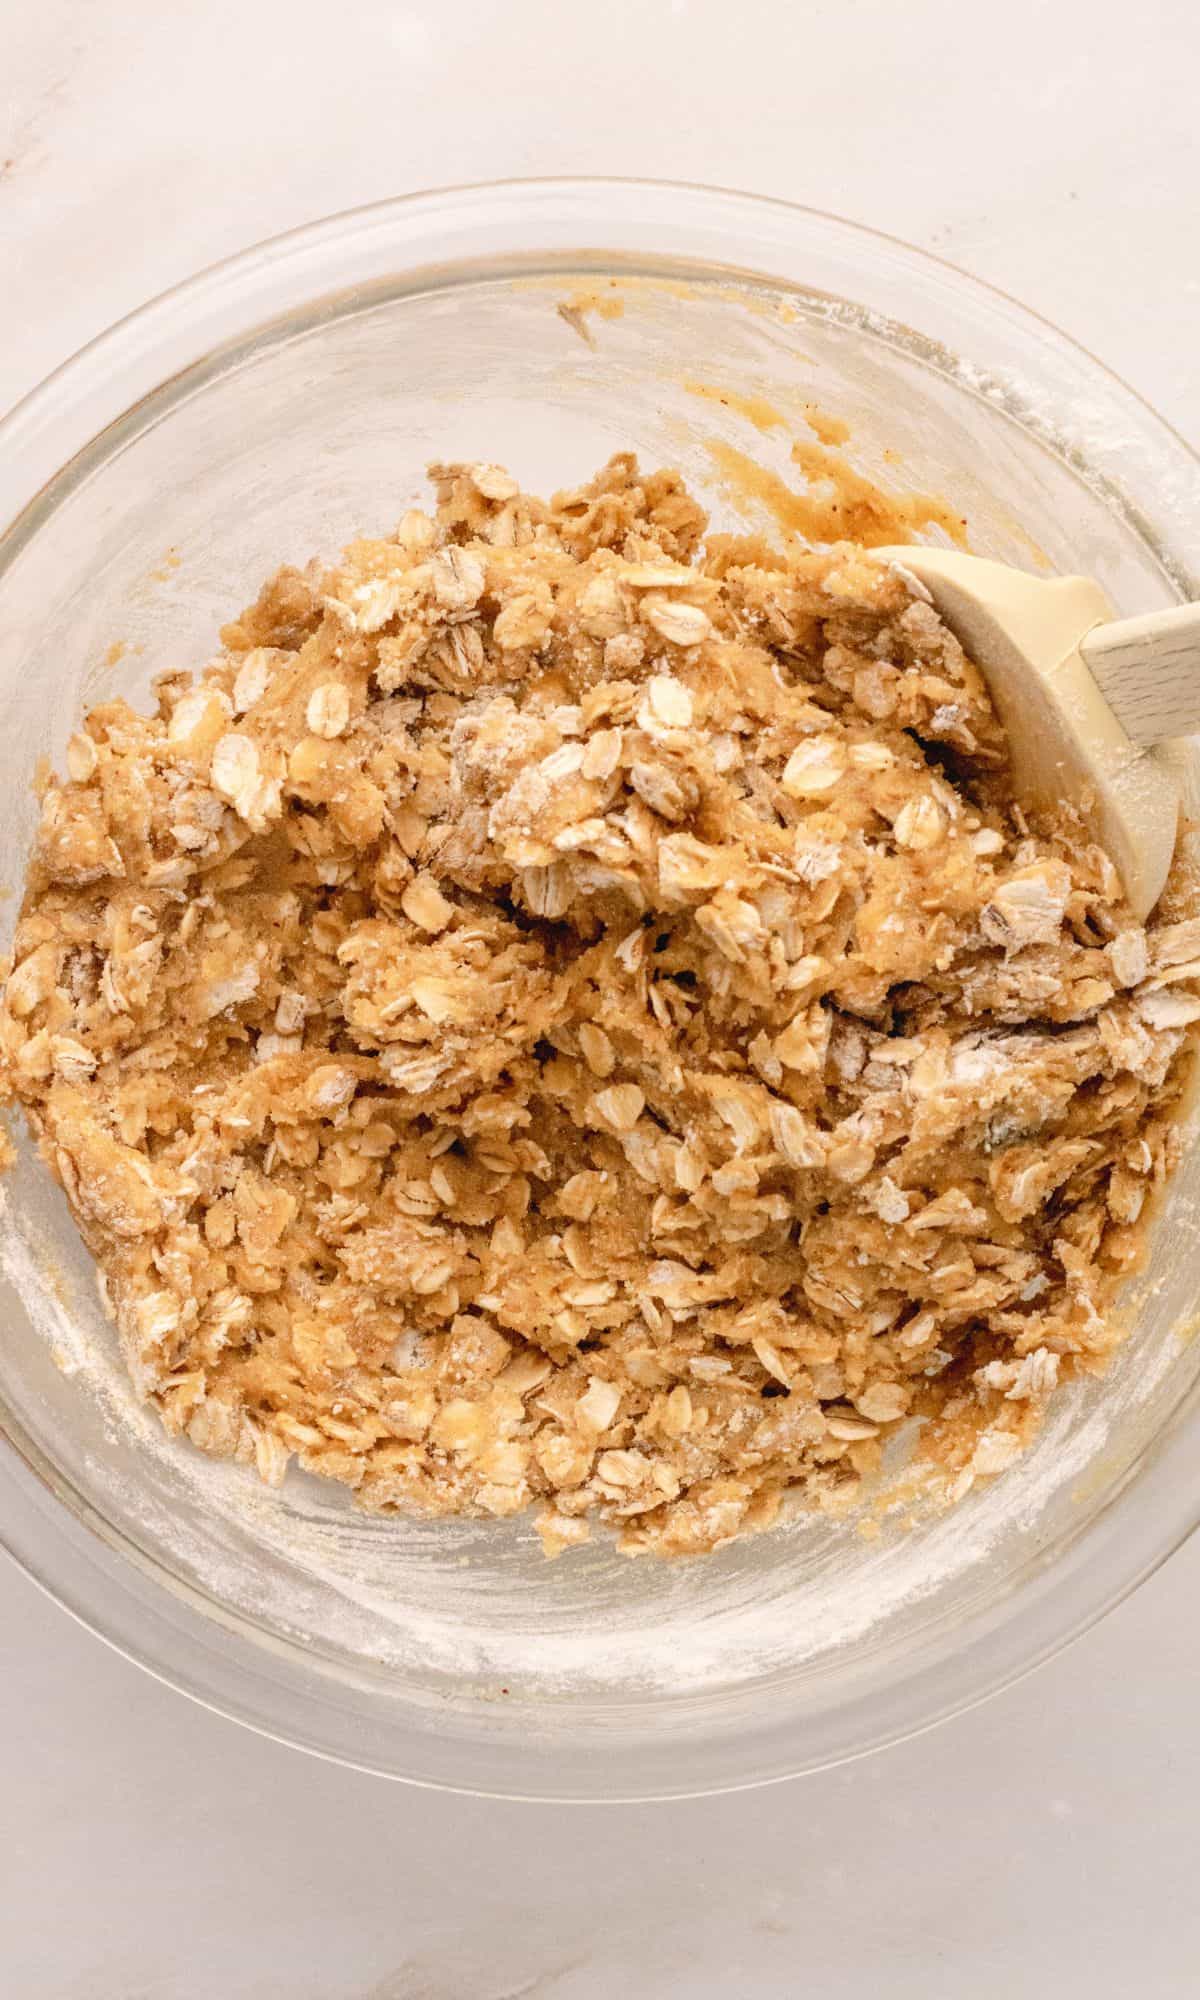 Oatmeal cookie preparation in a glass bowl being stirred with a white spatula.